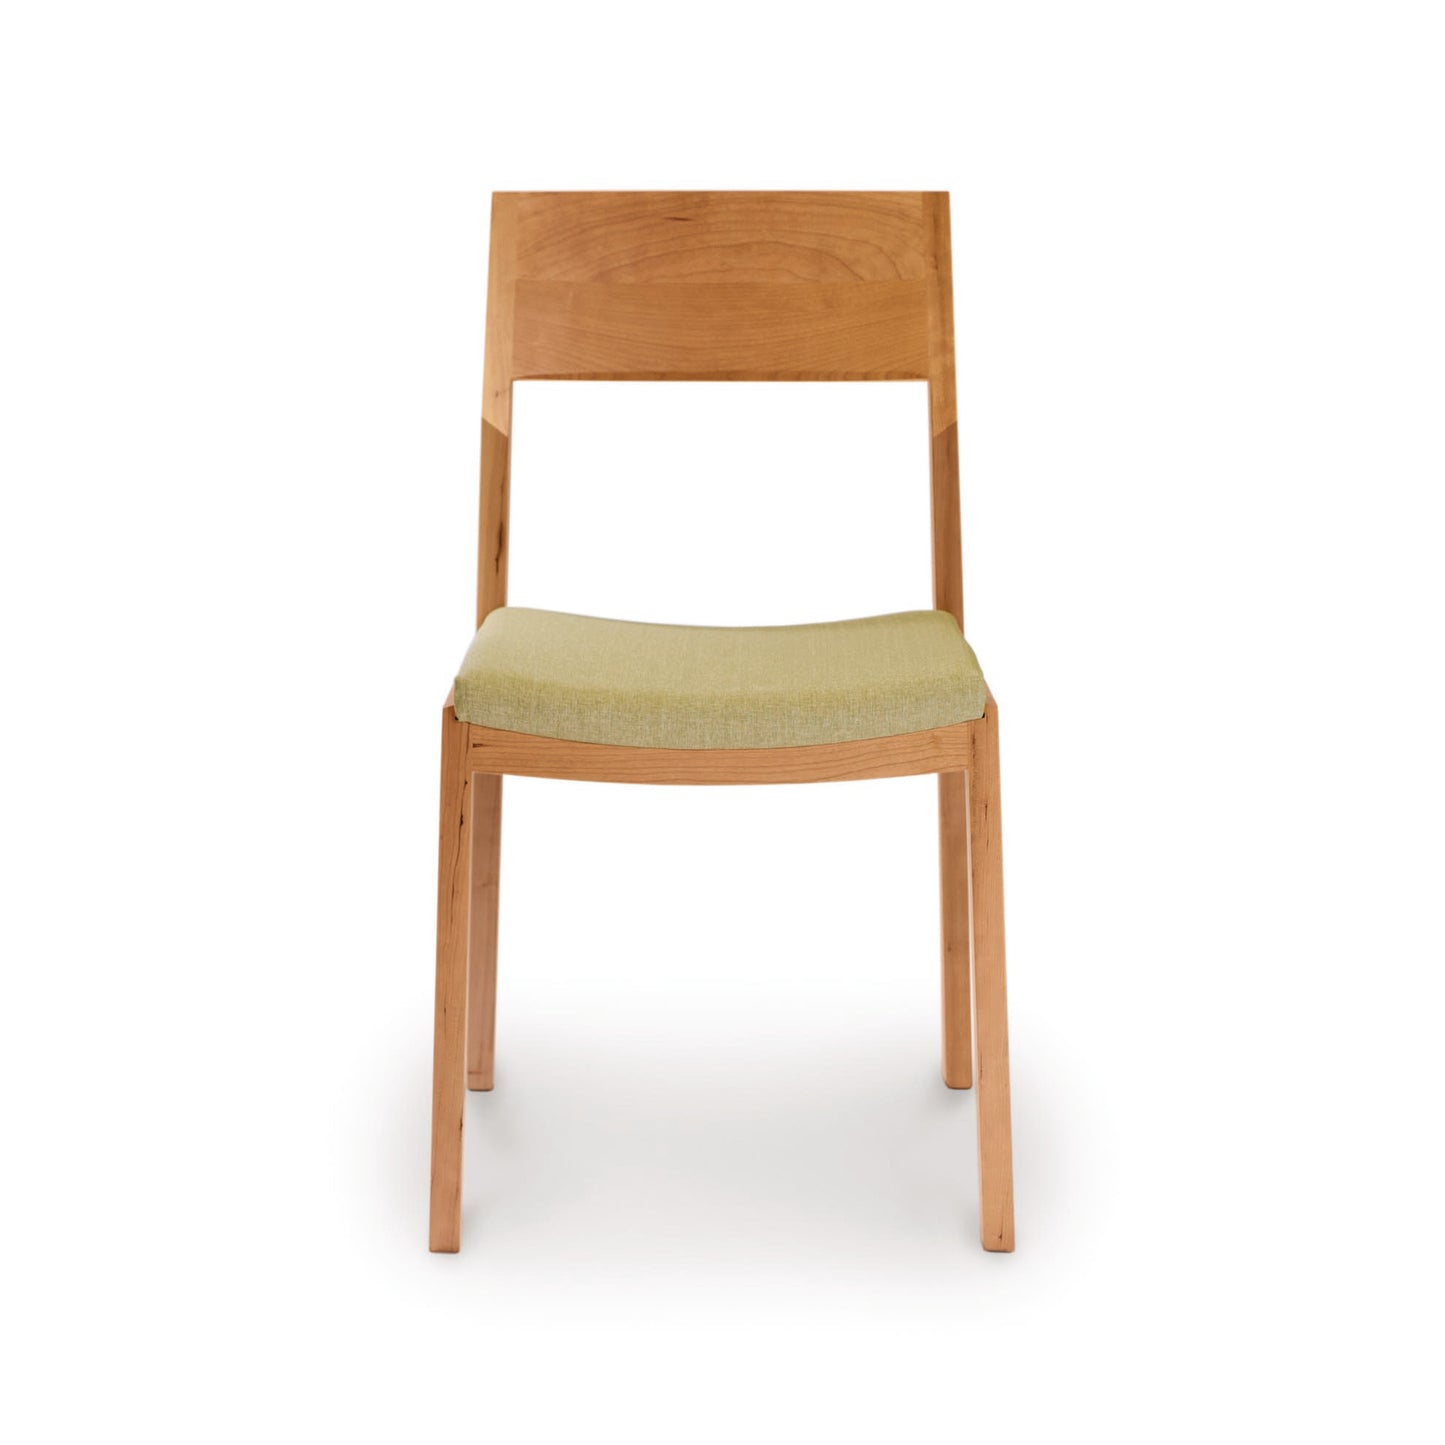 A solid cherry wood Copeland Furniture Iso Chair with a green fabric seat against a white background, crafted from sustainably sourced hardwoods.